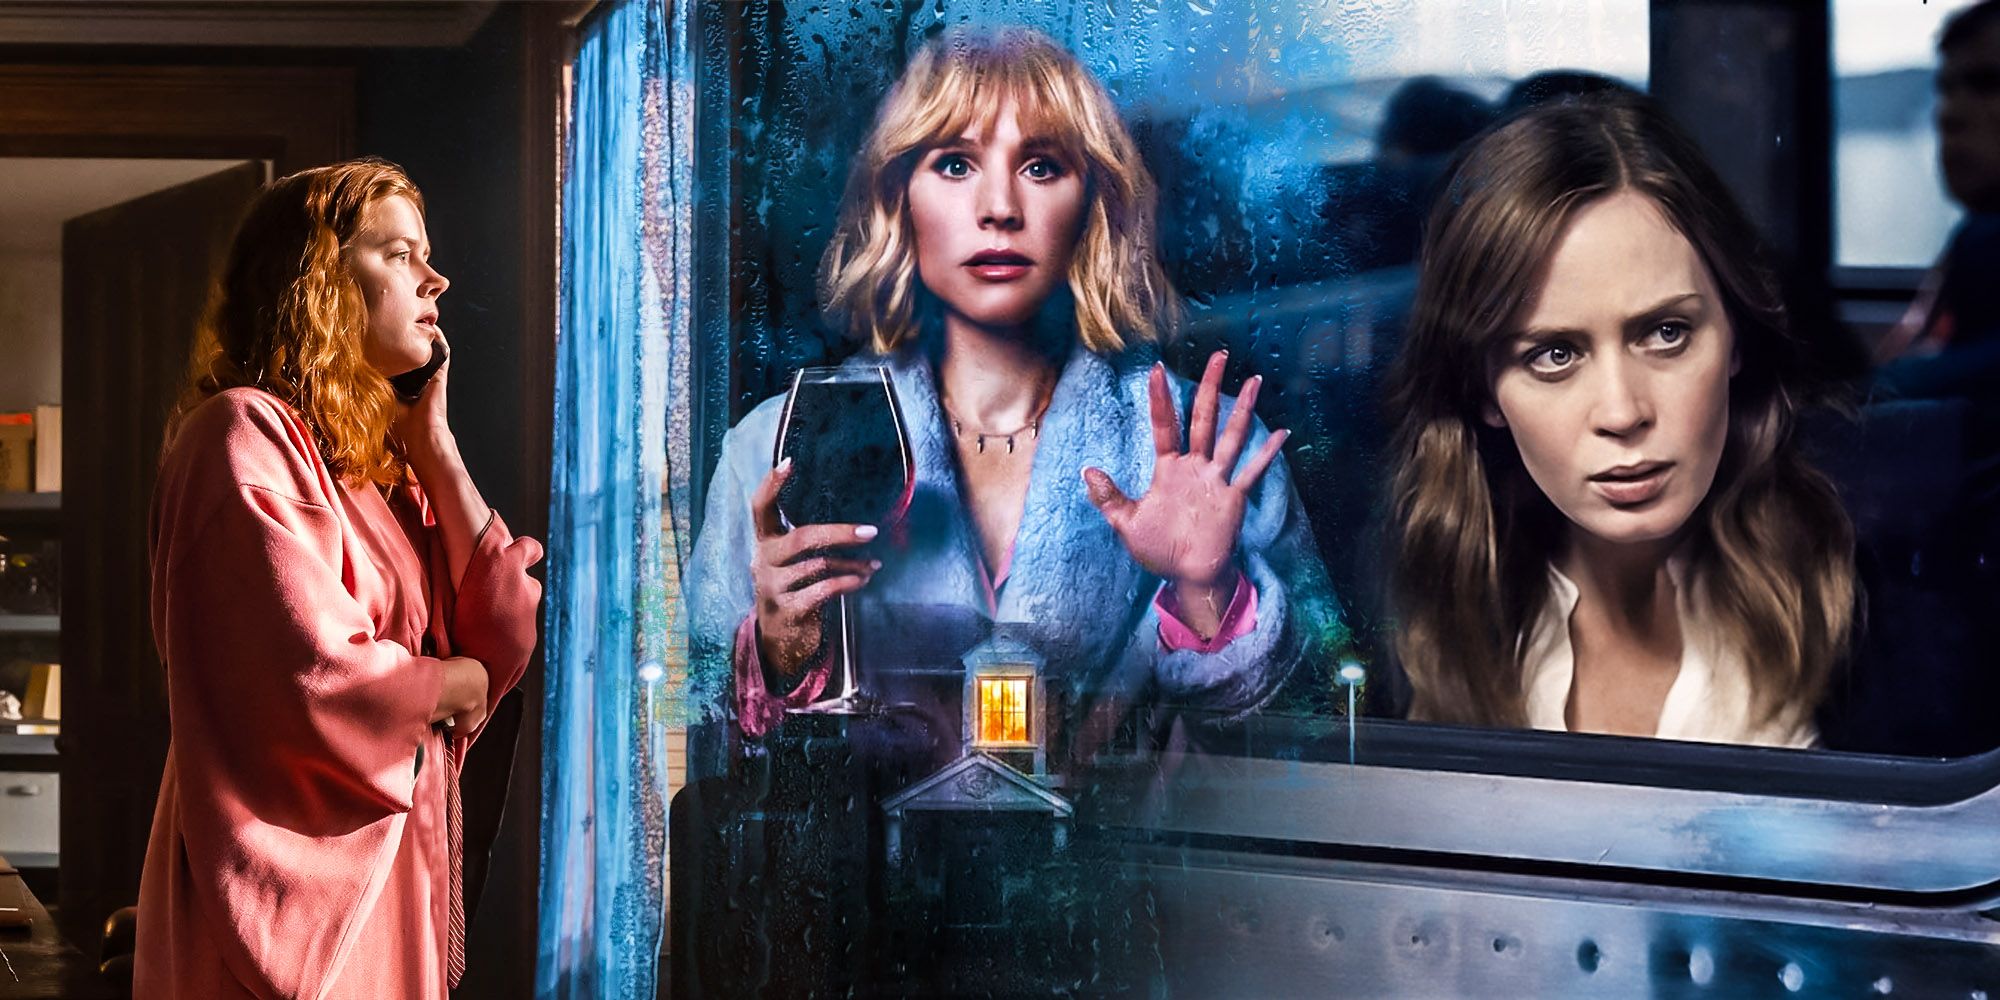 Kristen Bell Netflix spoof 'The Woman in the House Across the Street from  the Girl in the Window' gets lost in its own mystery